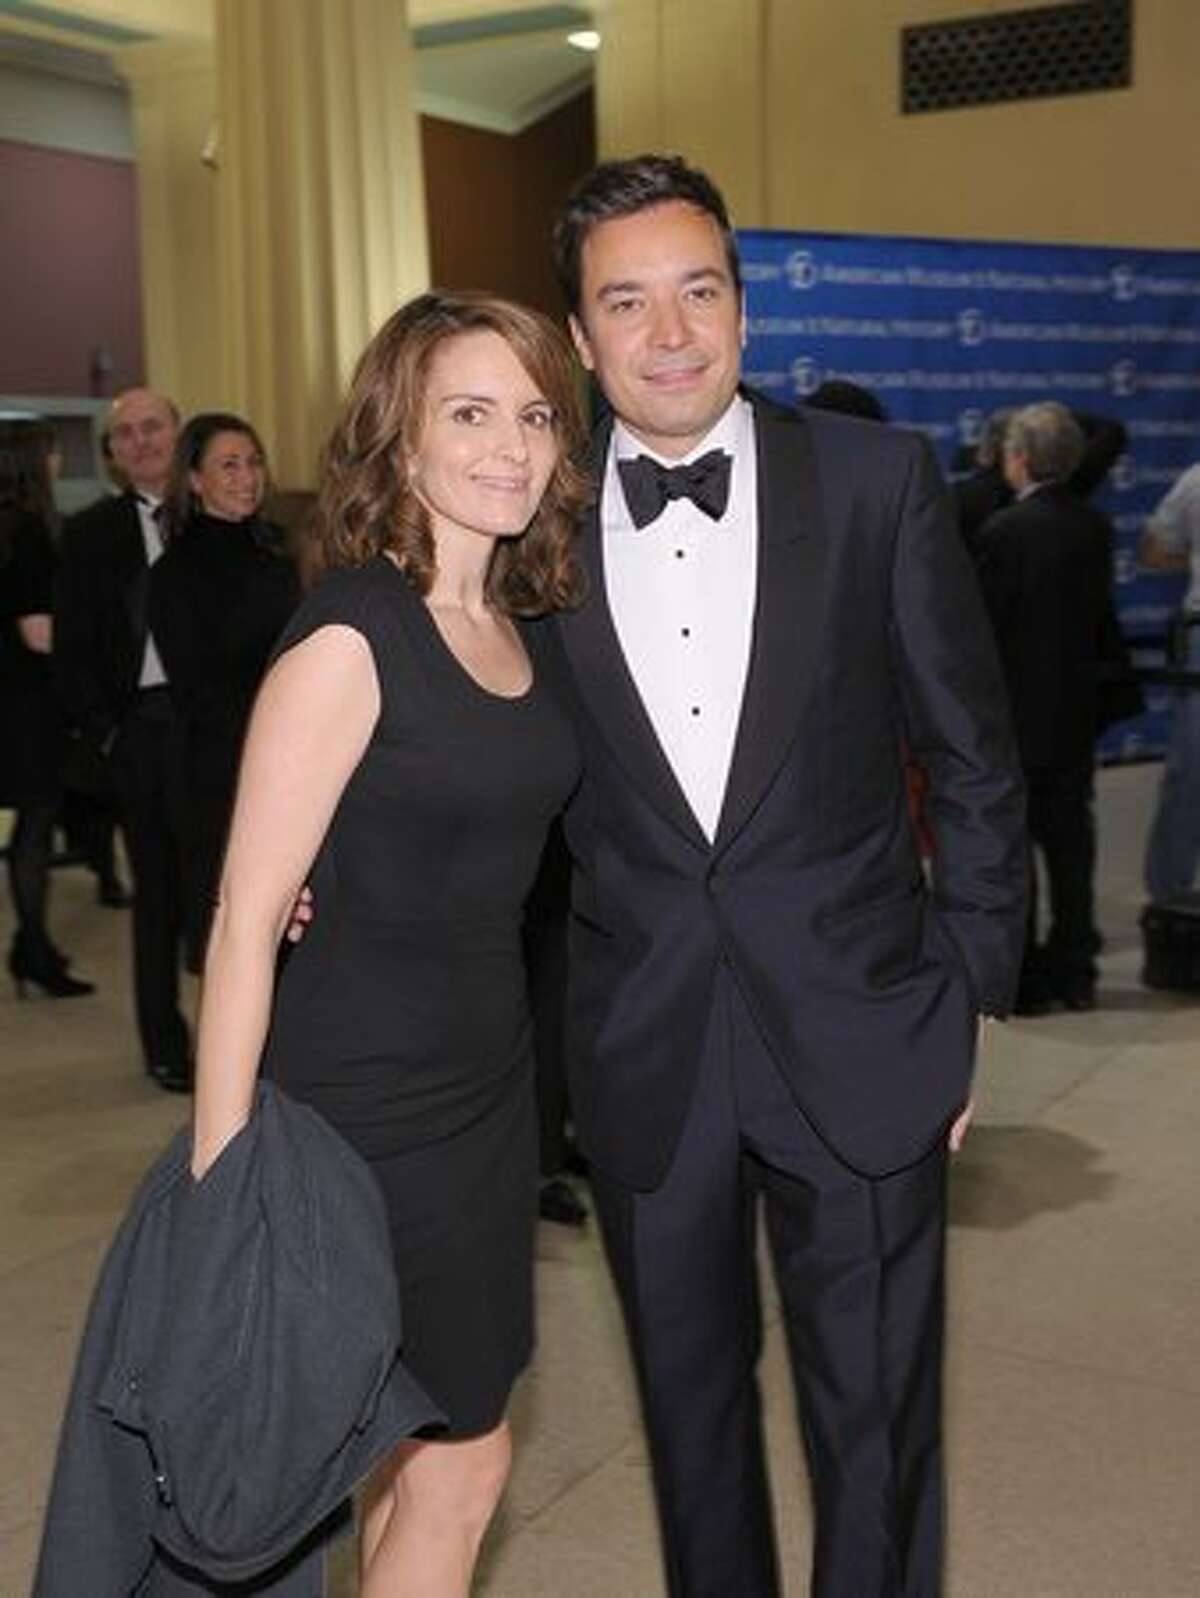 Actors and comedians Tina Fey and Jimmy Fallon attend the American Museum of Natural History's 2010 Museum Gala at the American Museum of Natural History in New York City.